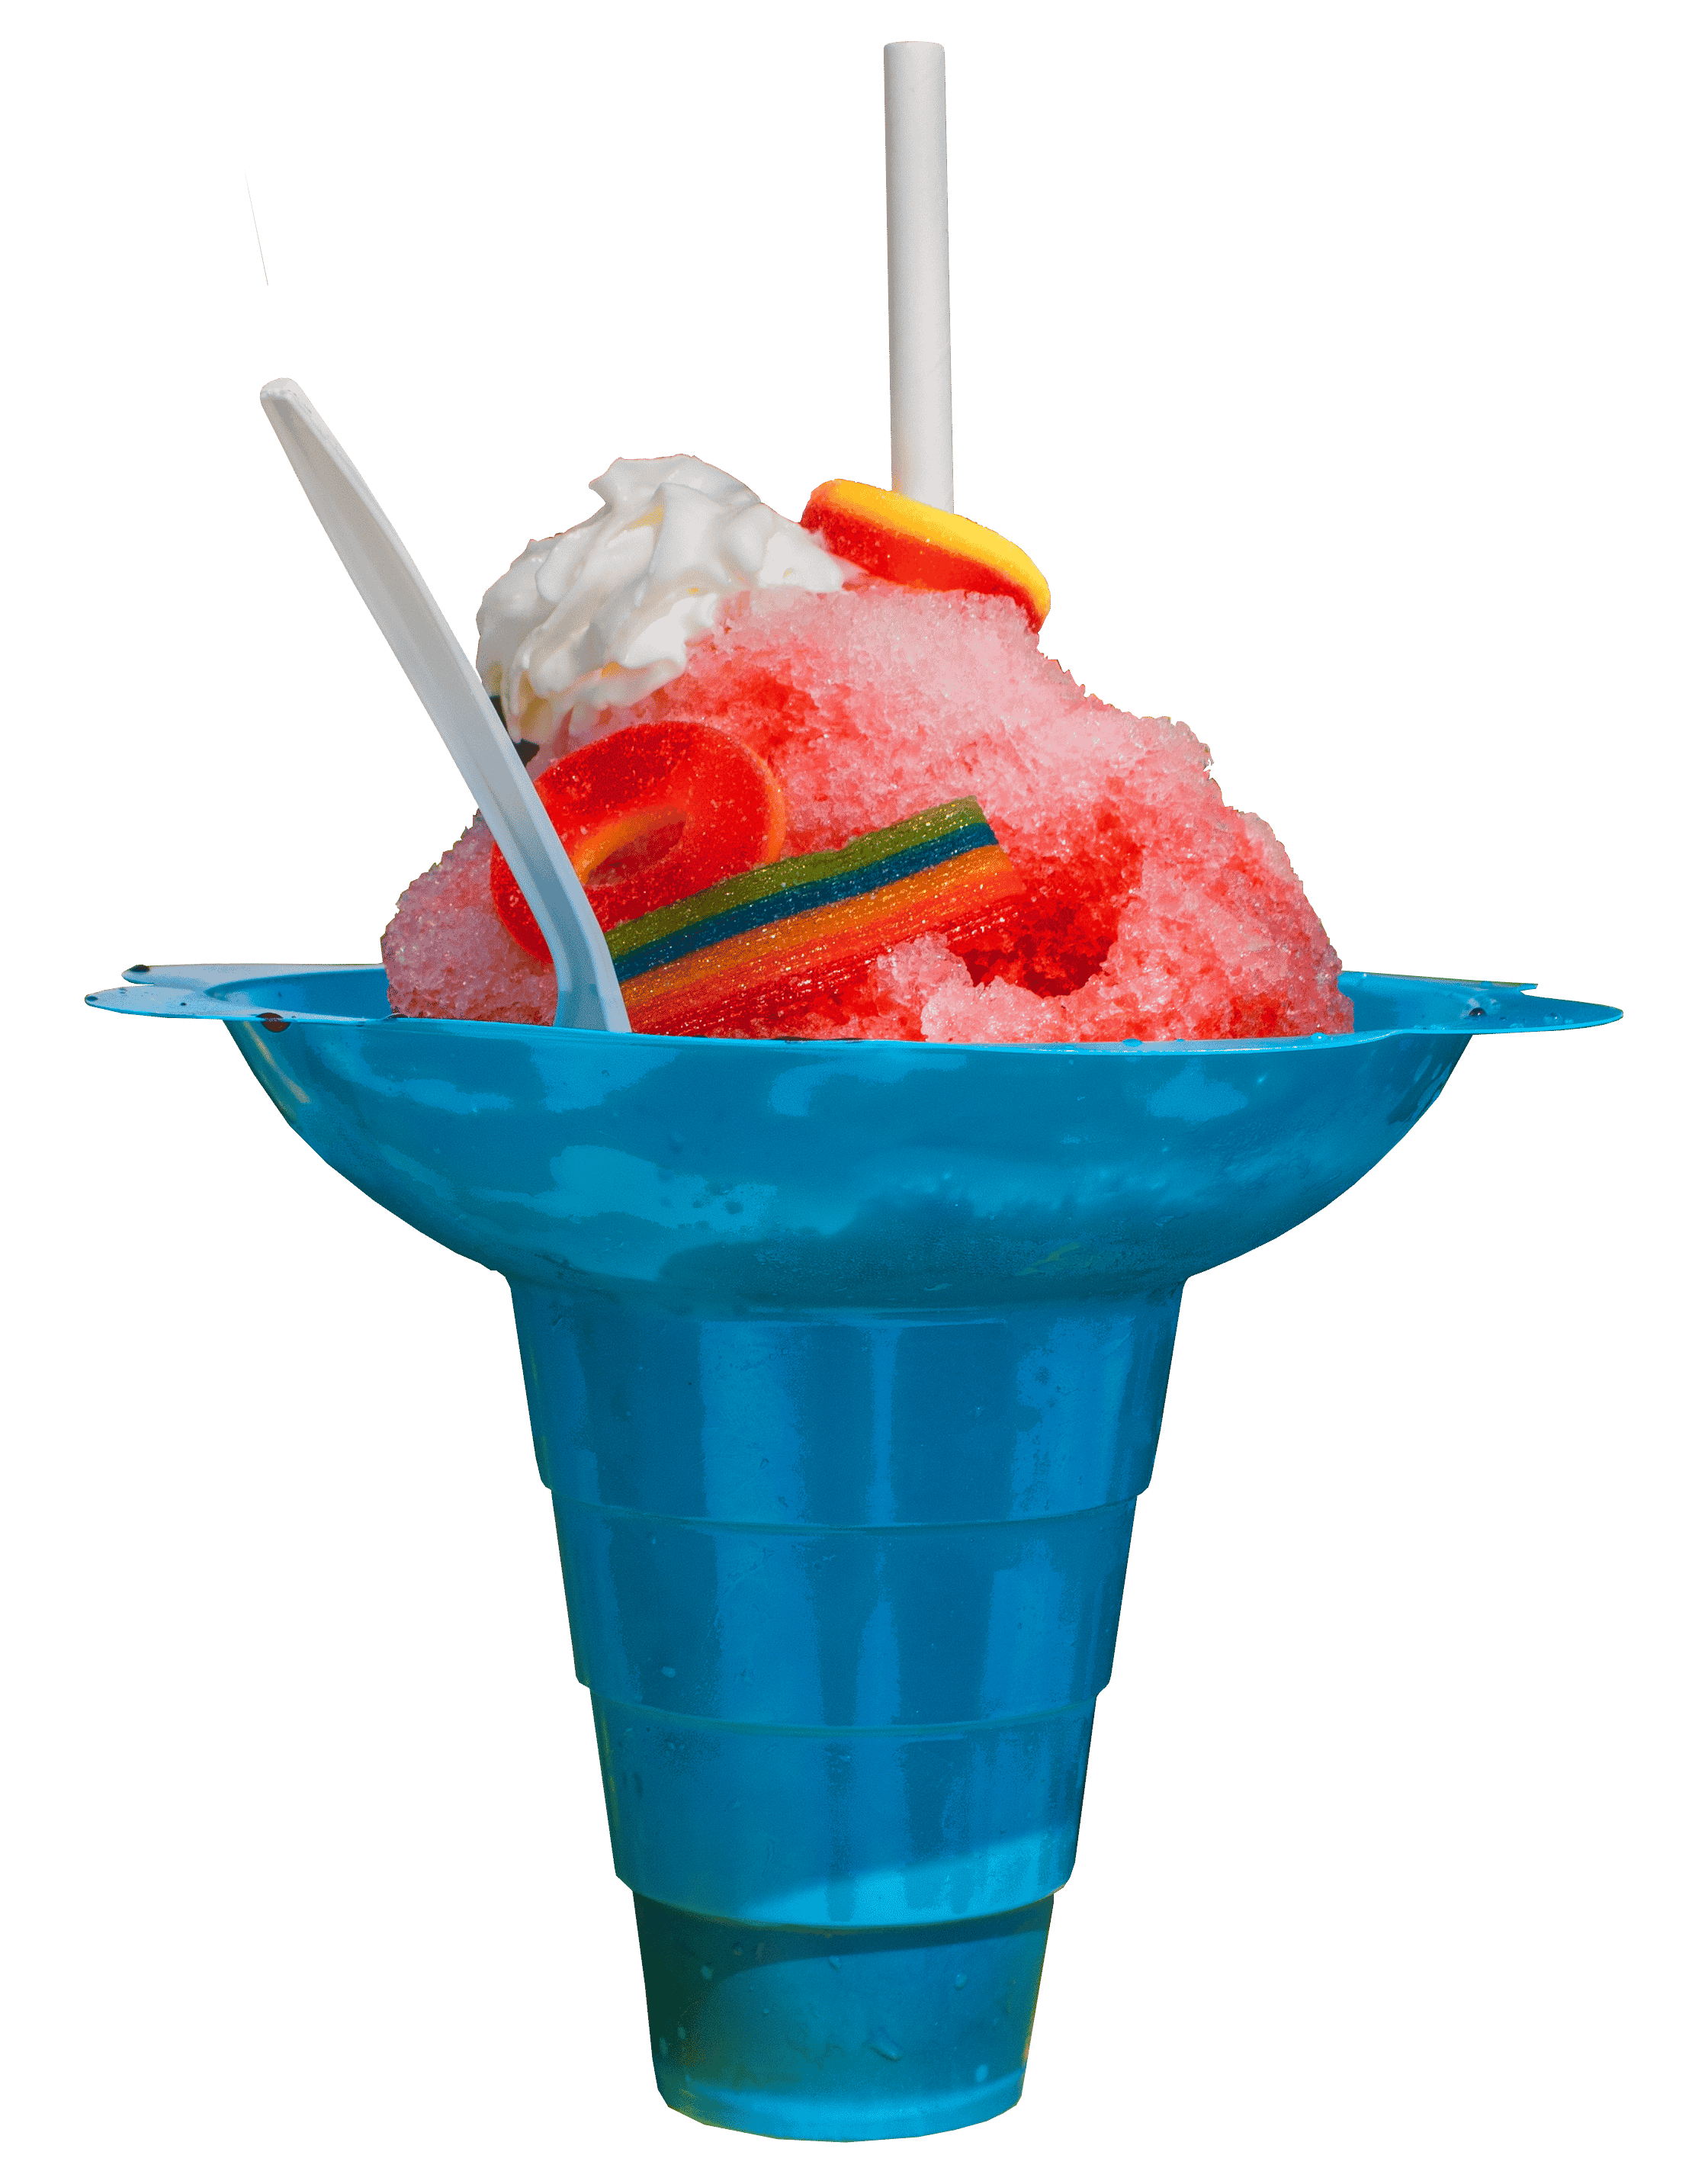 shaved ice is tasty and fun